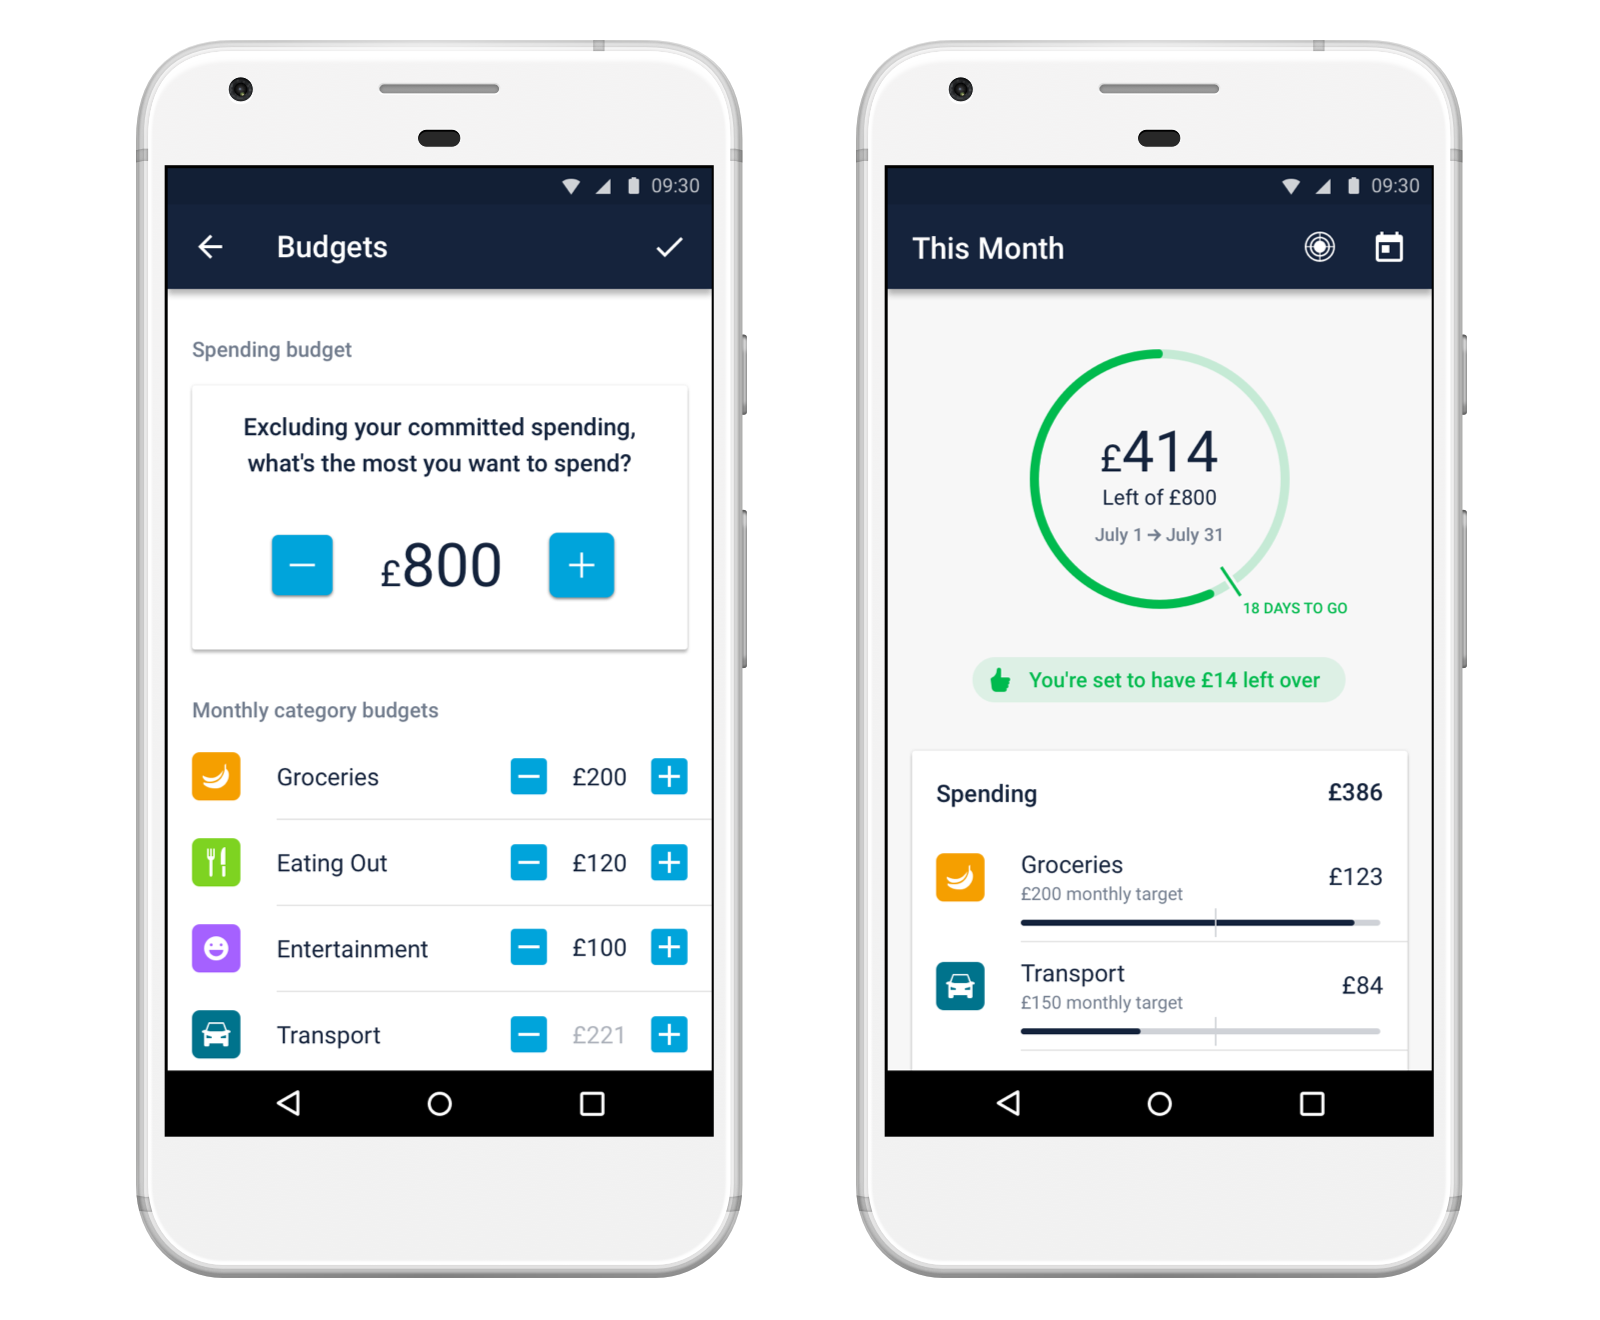 Screenshots showing how to set a spending budget in the Monzo app